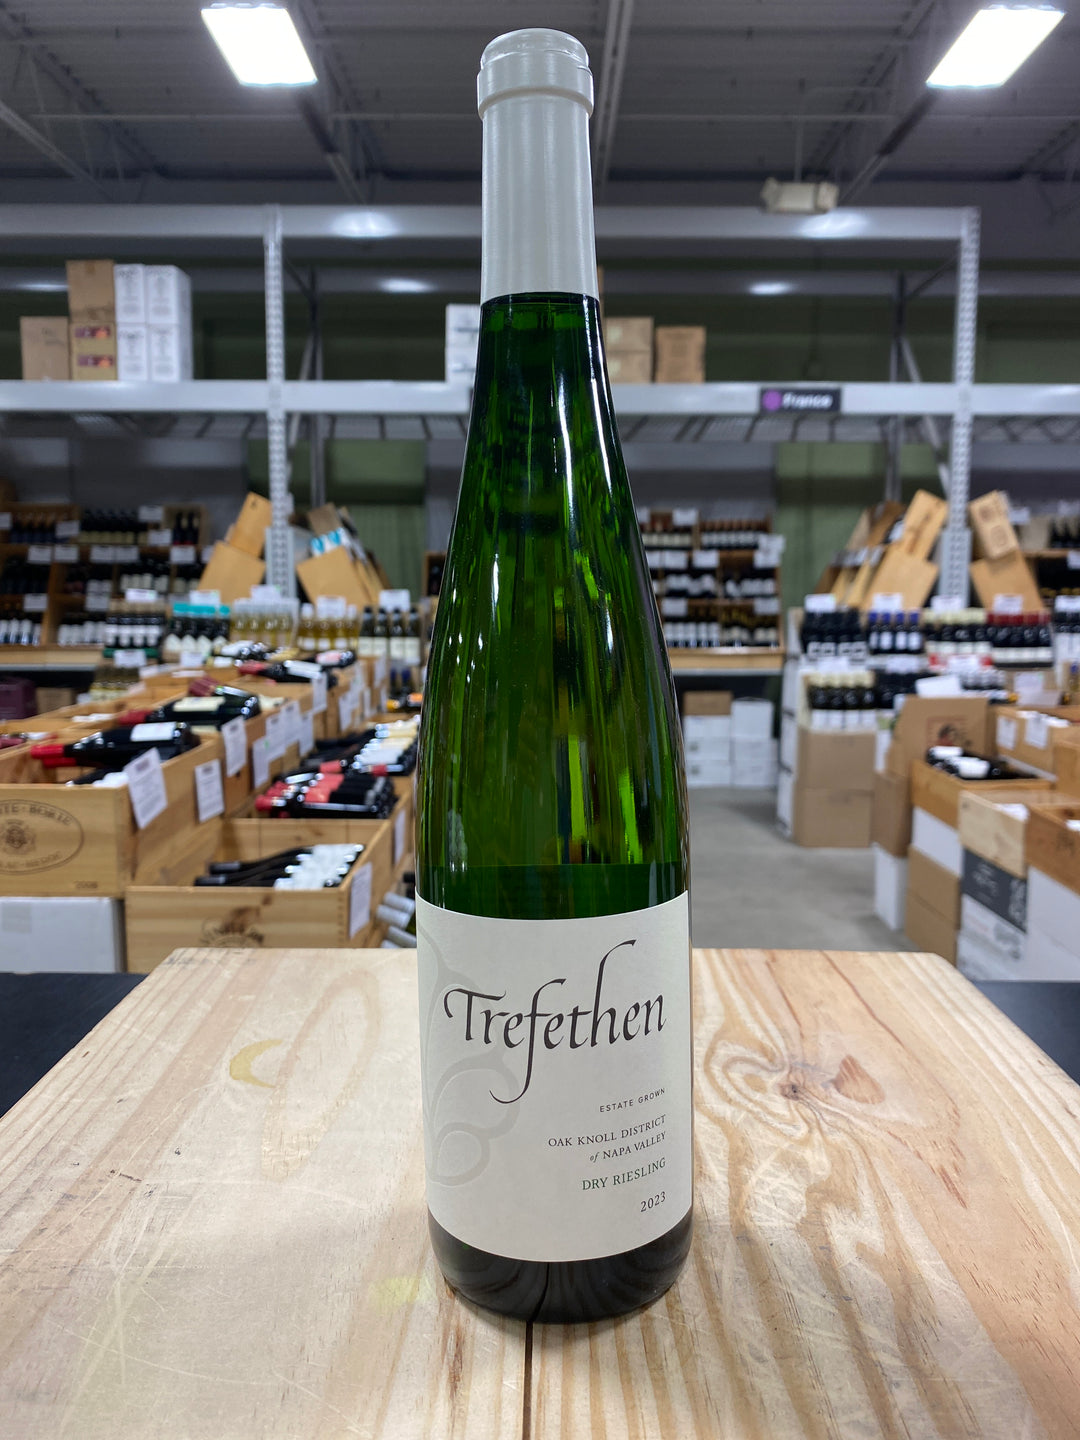 Trefethen Family Dry Riesling Estate Oak Knoll District Napa Valley CA